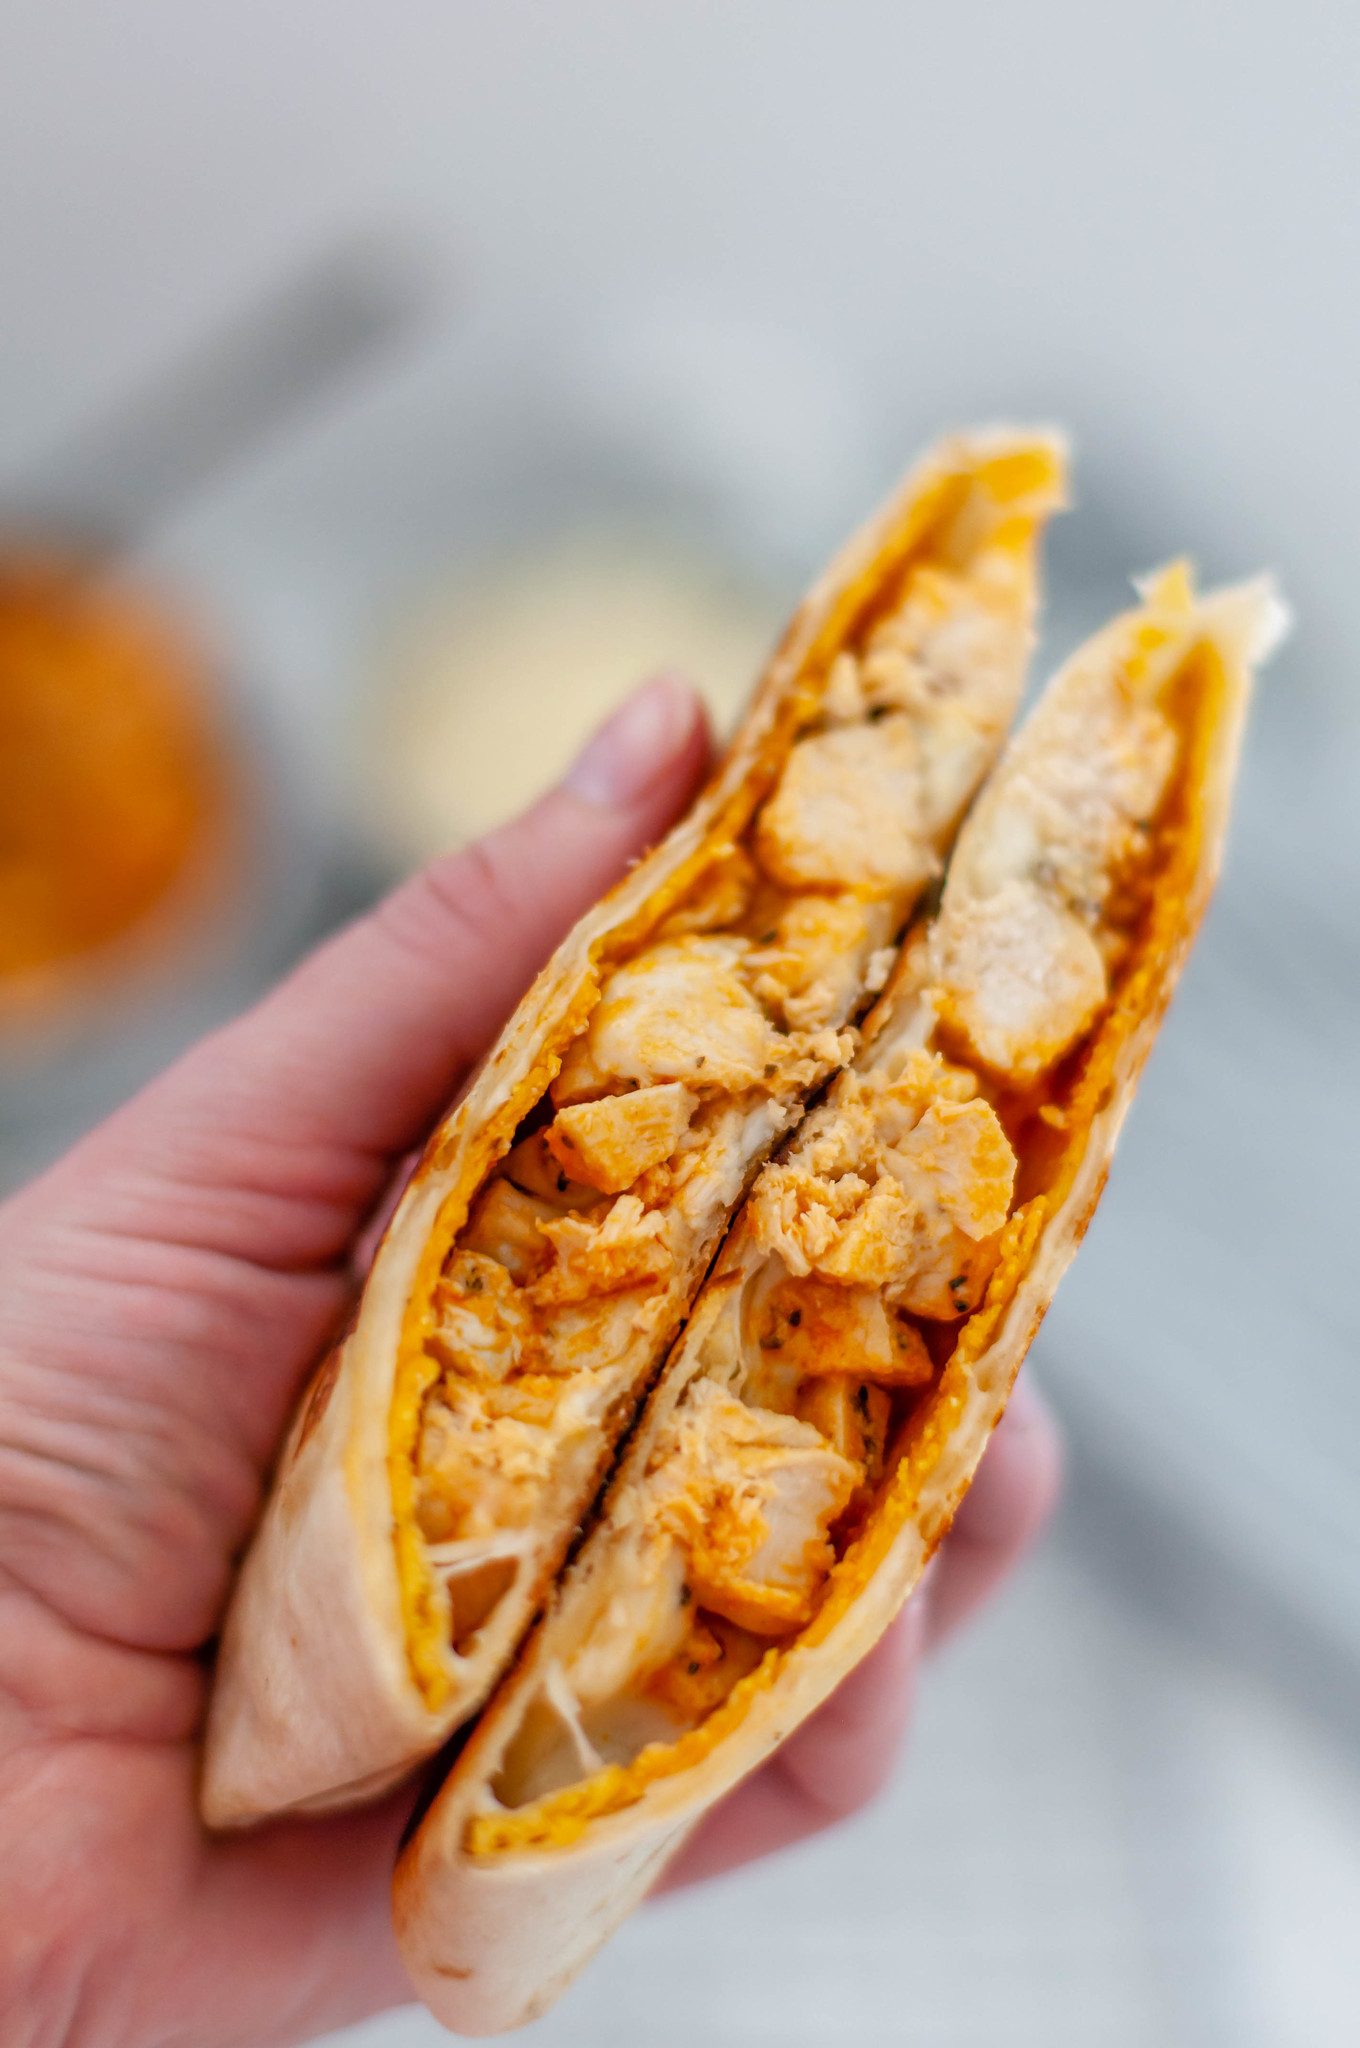 Meet your new craving, the Buffalo Chicken Crunch Wraps. Spicy buffalo chicken, mozzarella cheese, blue cheese and a crispy tostada shell all wrapped up in a soft flour tortilla and cooked to crispy perfection.